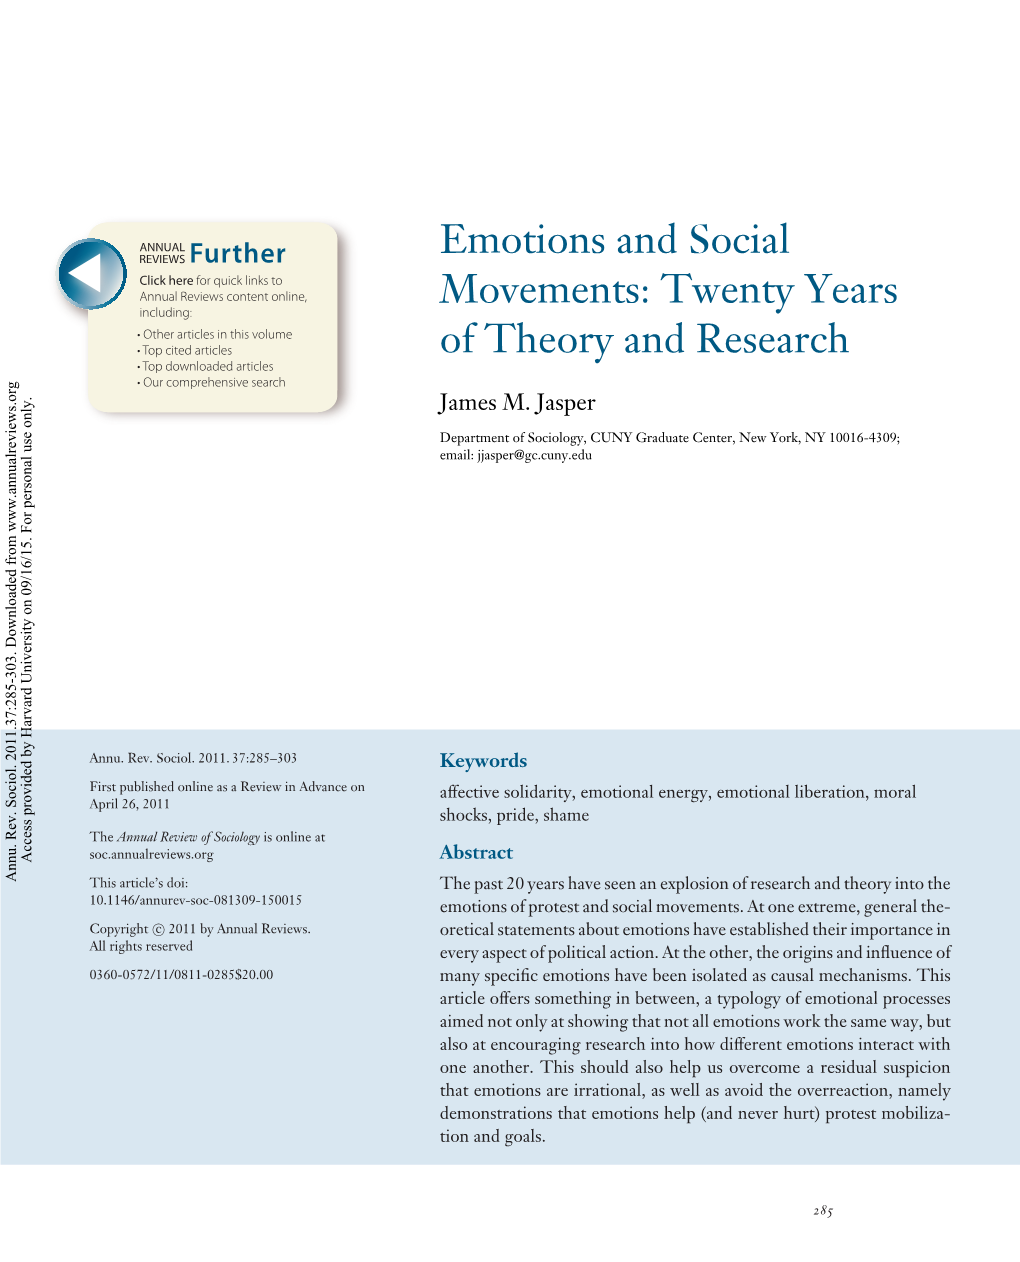 Emotions and Social Movements: Twenty Years of Theory and Research